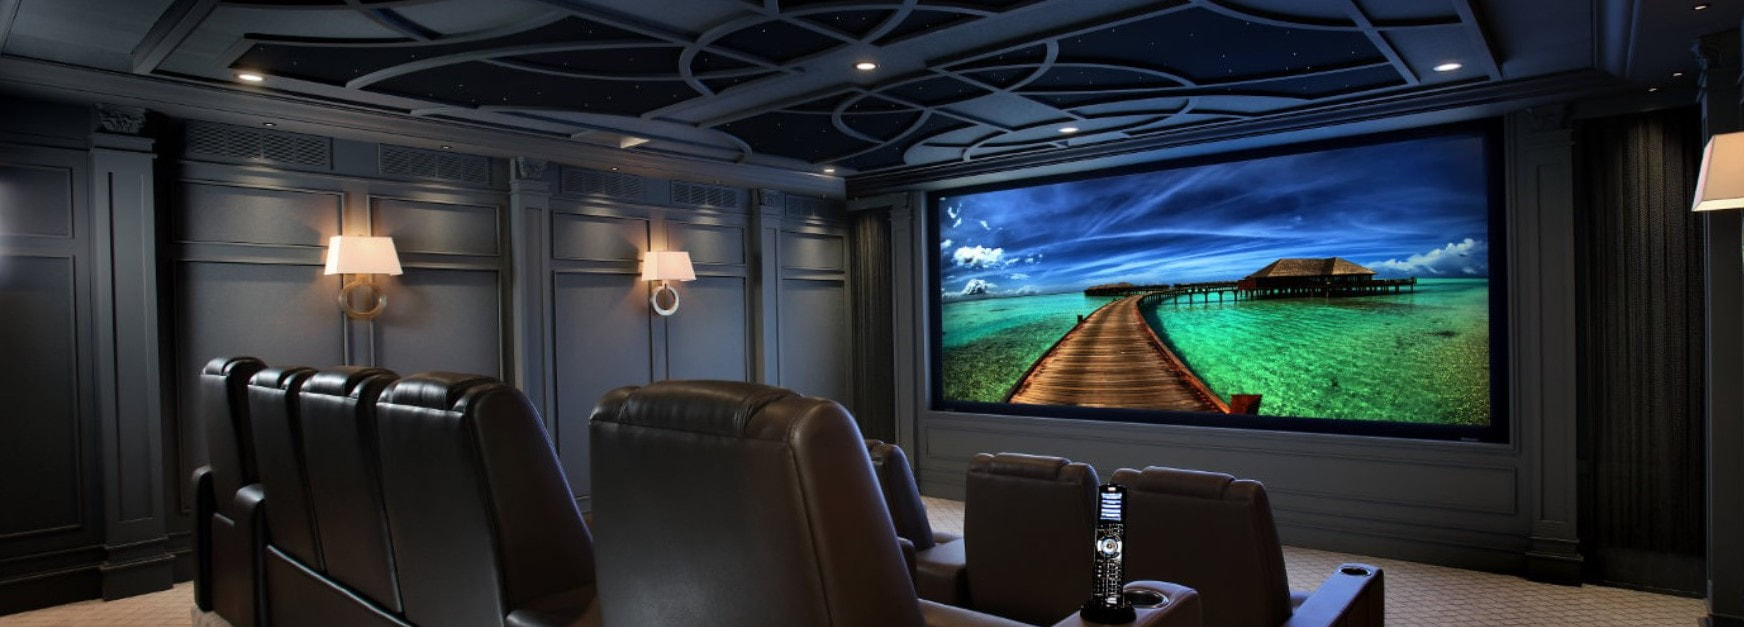 private movie theaters for the super-rich